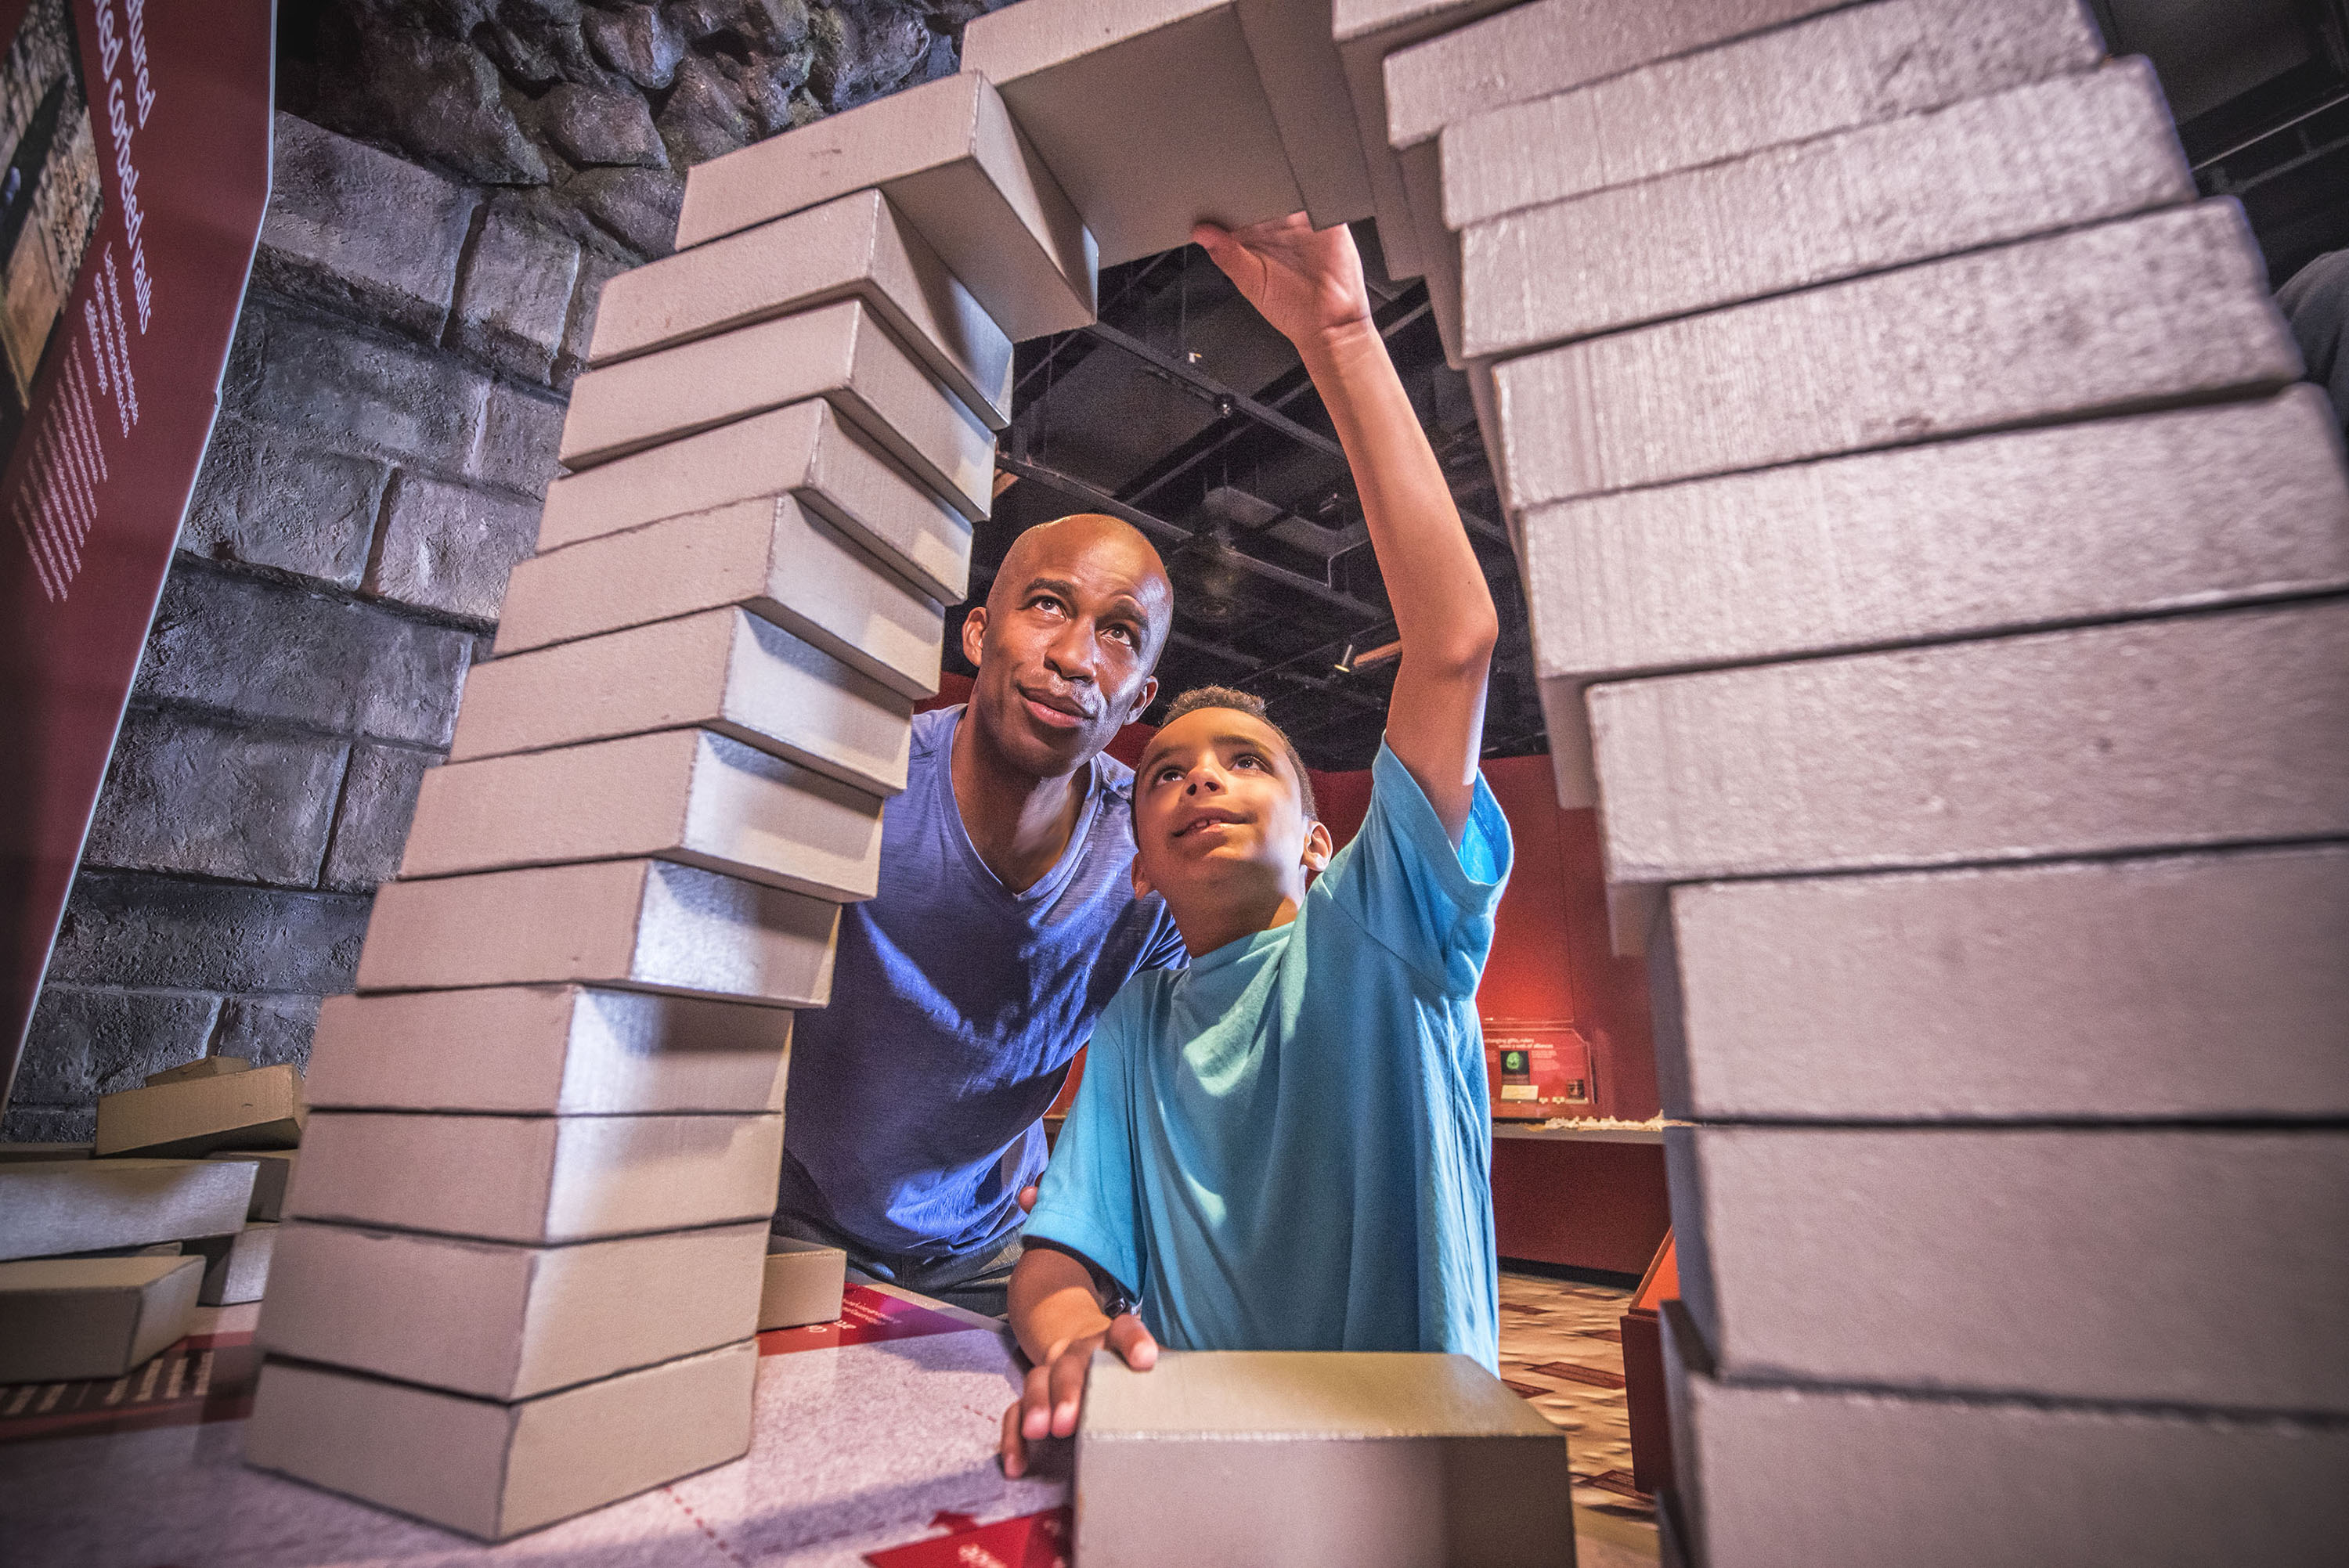 Maya:  Hidden  Worlds  Revealed coming in May 2016 to the Mays Family Center for Special Exhibitions and Events at the Witte Museum features numerous interactive and hands-on activities.